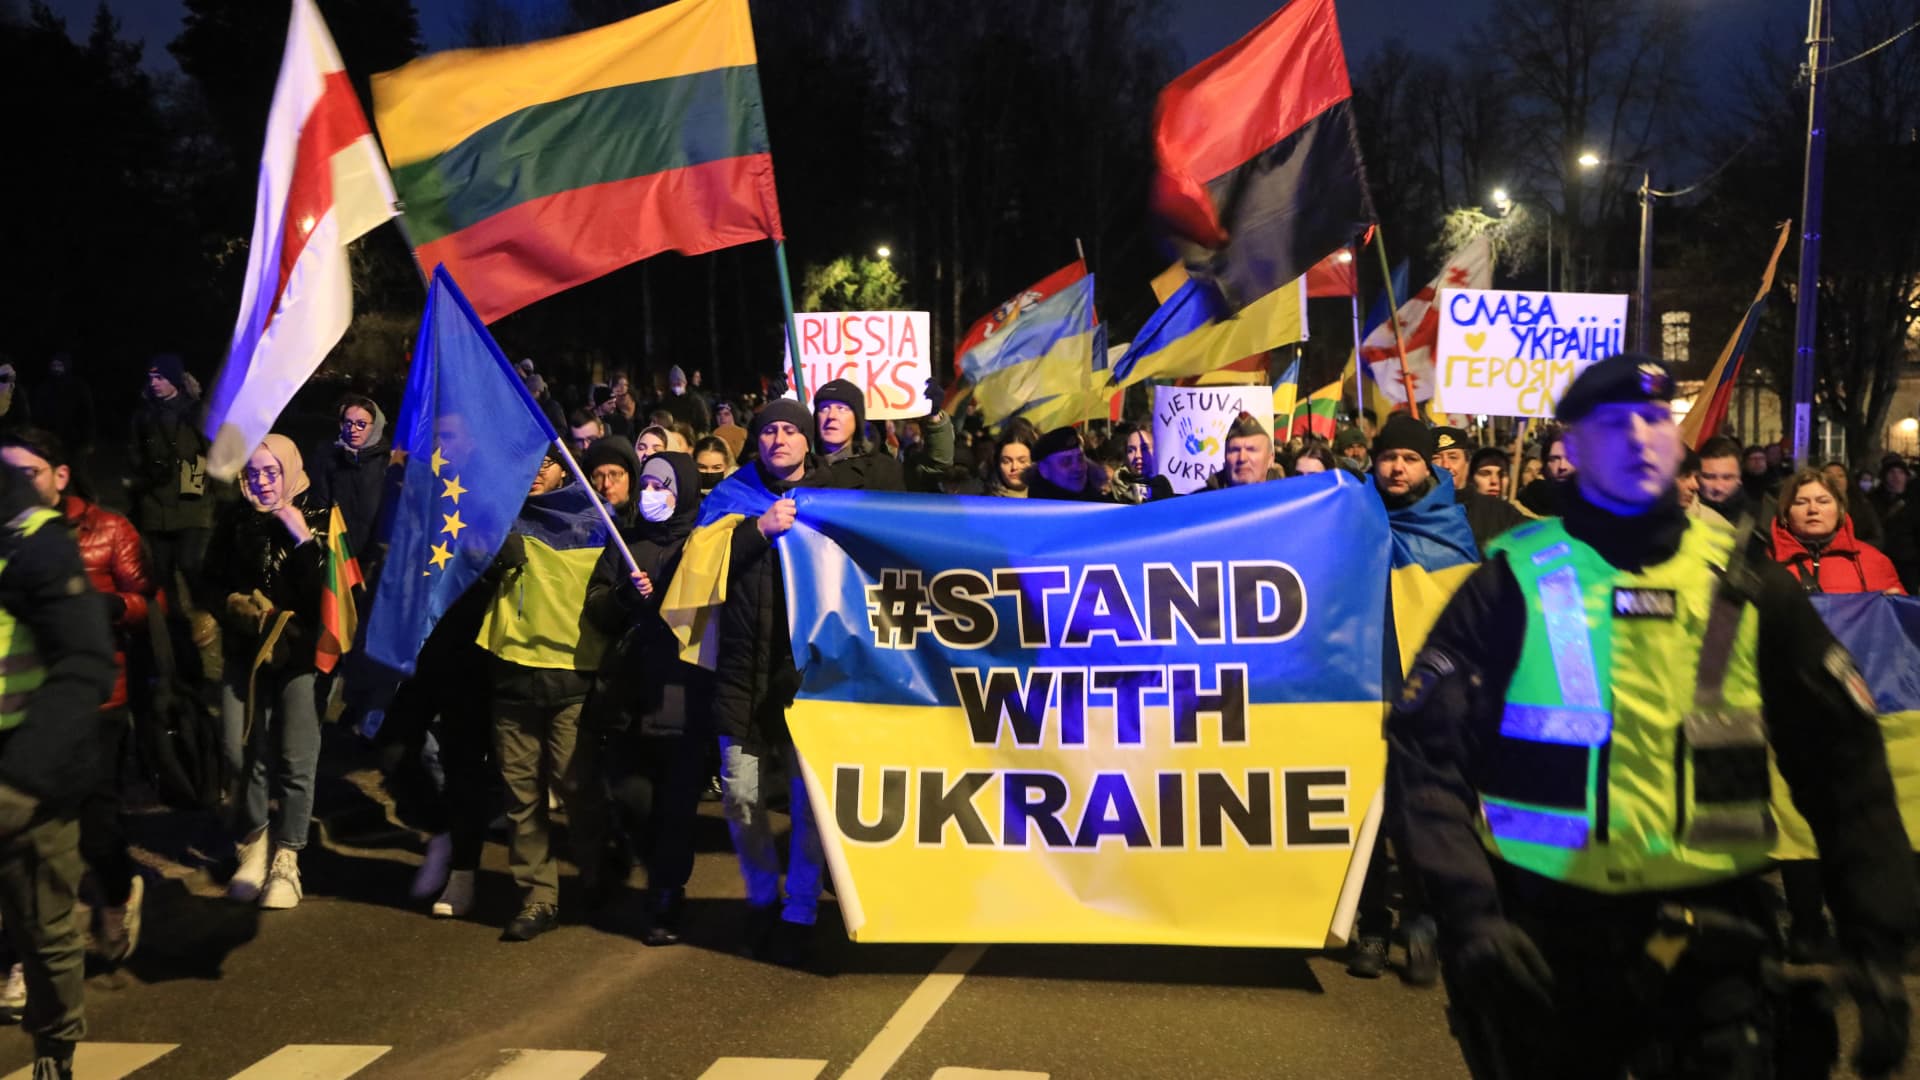 Demonstrators take part in a protest against the Russian invasion of Ukraine, in front of Russia's embassy in Vilnius, Lithuania, on February 24, 2022.